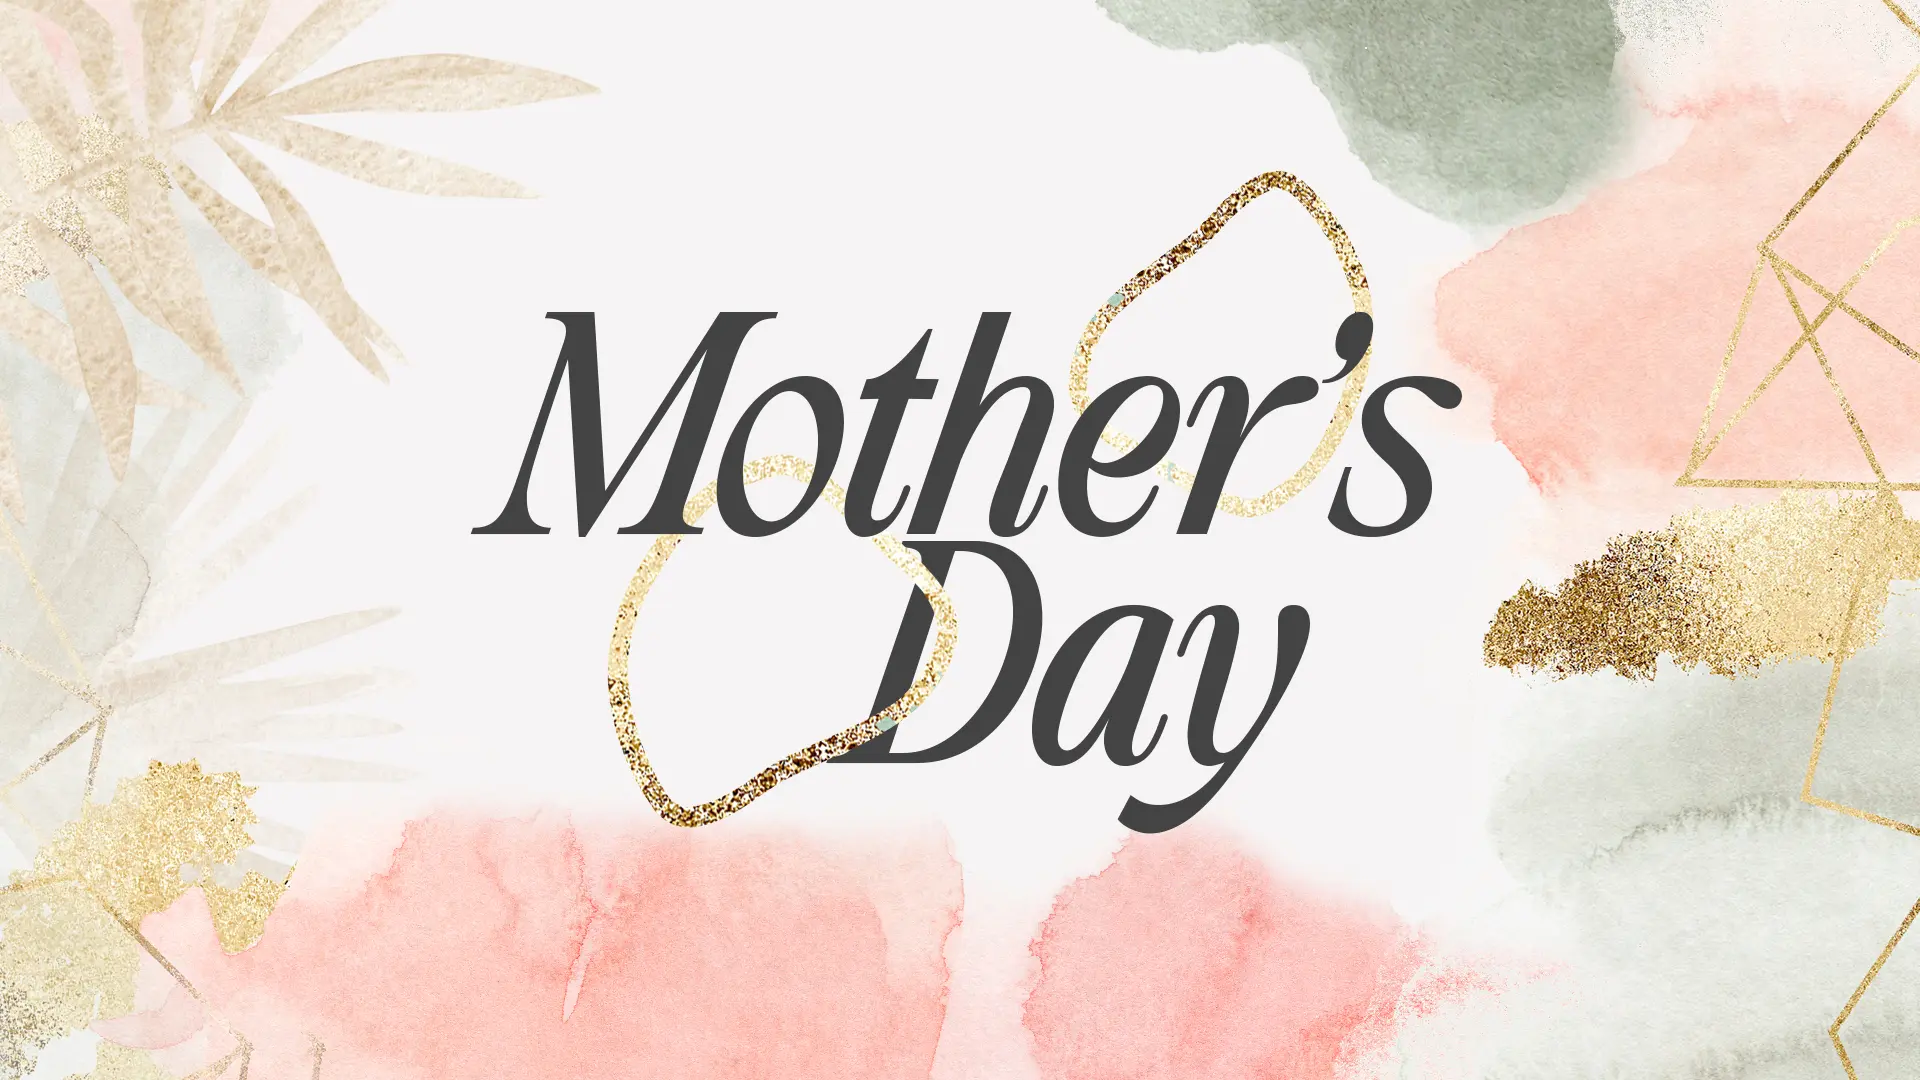 This Elegant Mother'S Day Church Graphic Blends Soft Watercolor Textures With Glittering Gold Accents To Create A Design That Is Both Sophisticated And Heartwarming, Making It A Perfect Tribute For A Special Mother’s Day Service.